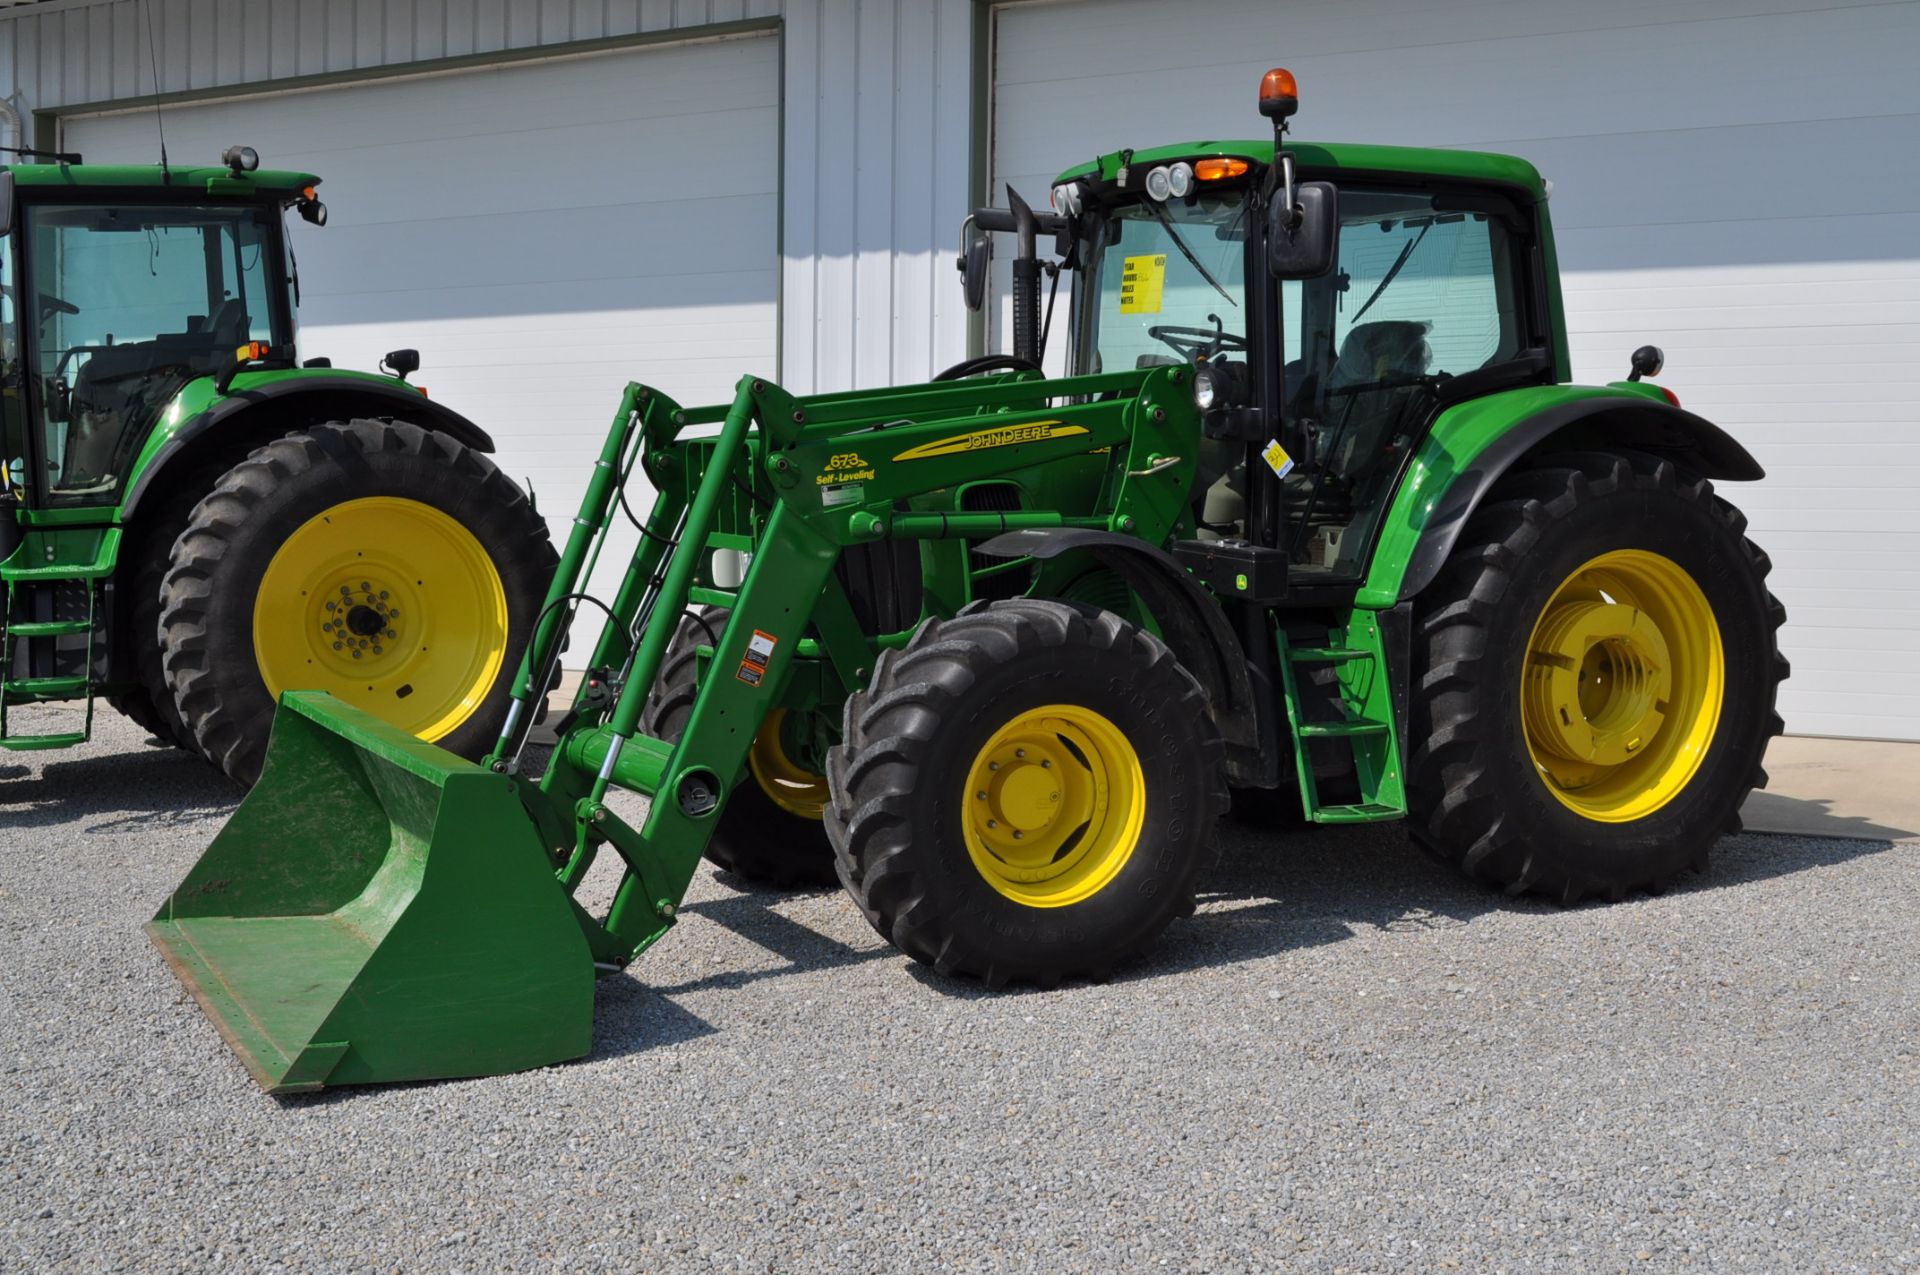 John Deere 6430 Premium tractor, MFWD, CHA, 600/65R38 rear, 540/65R24 front, IVT, front susp. - Image 2 of 18